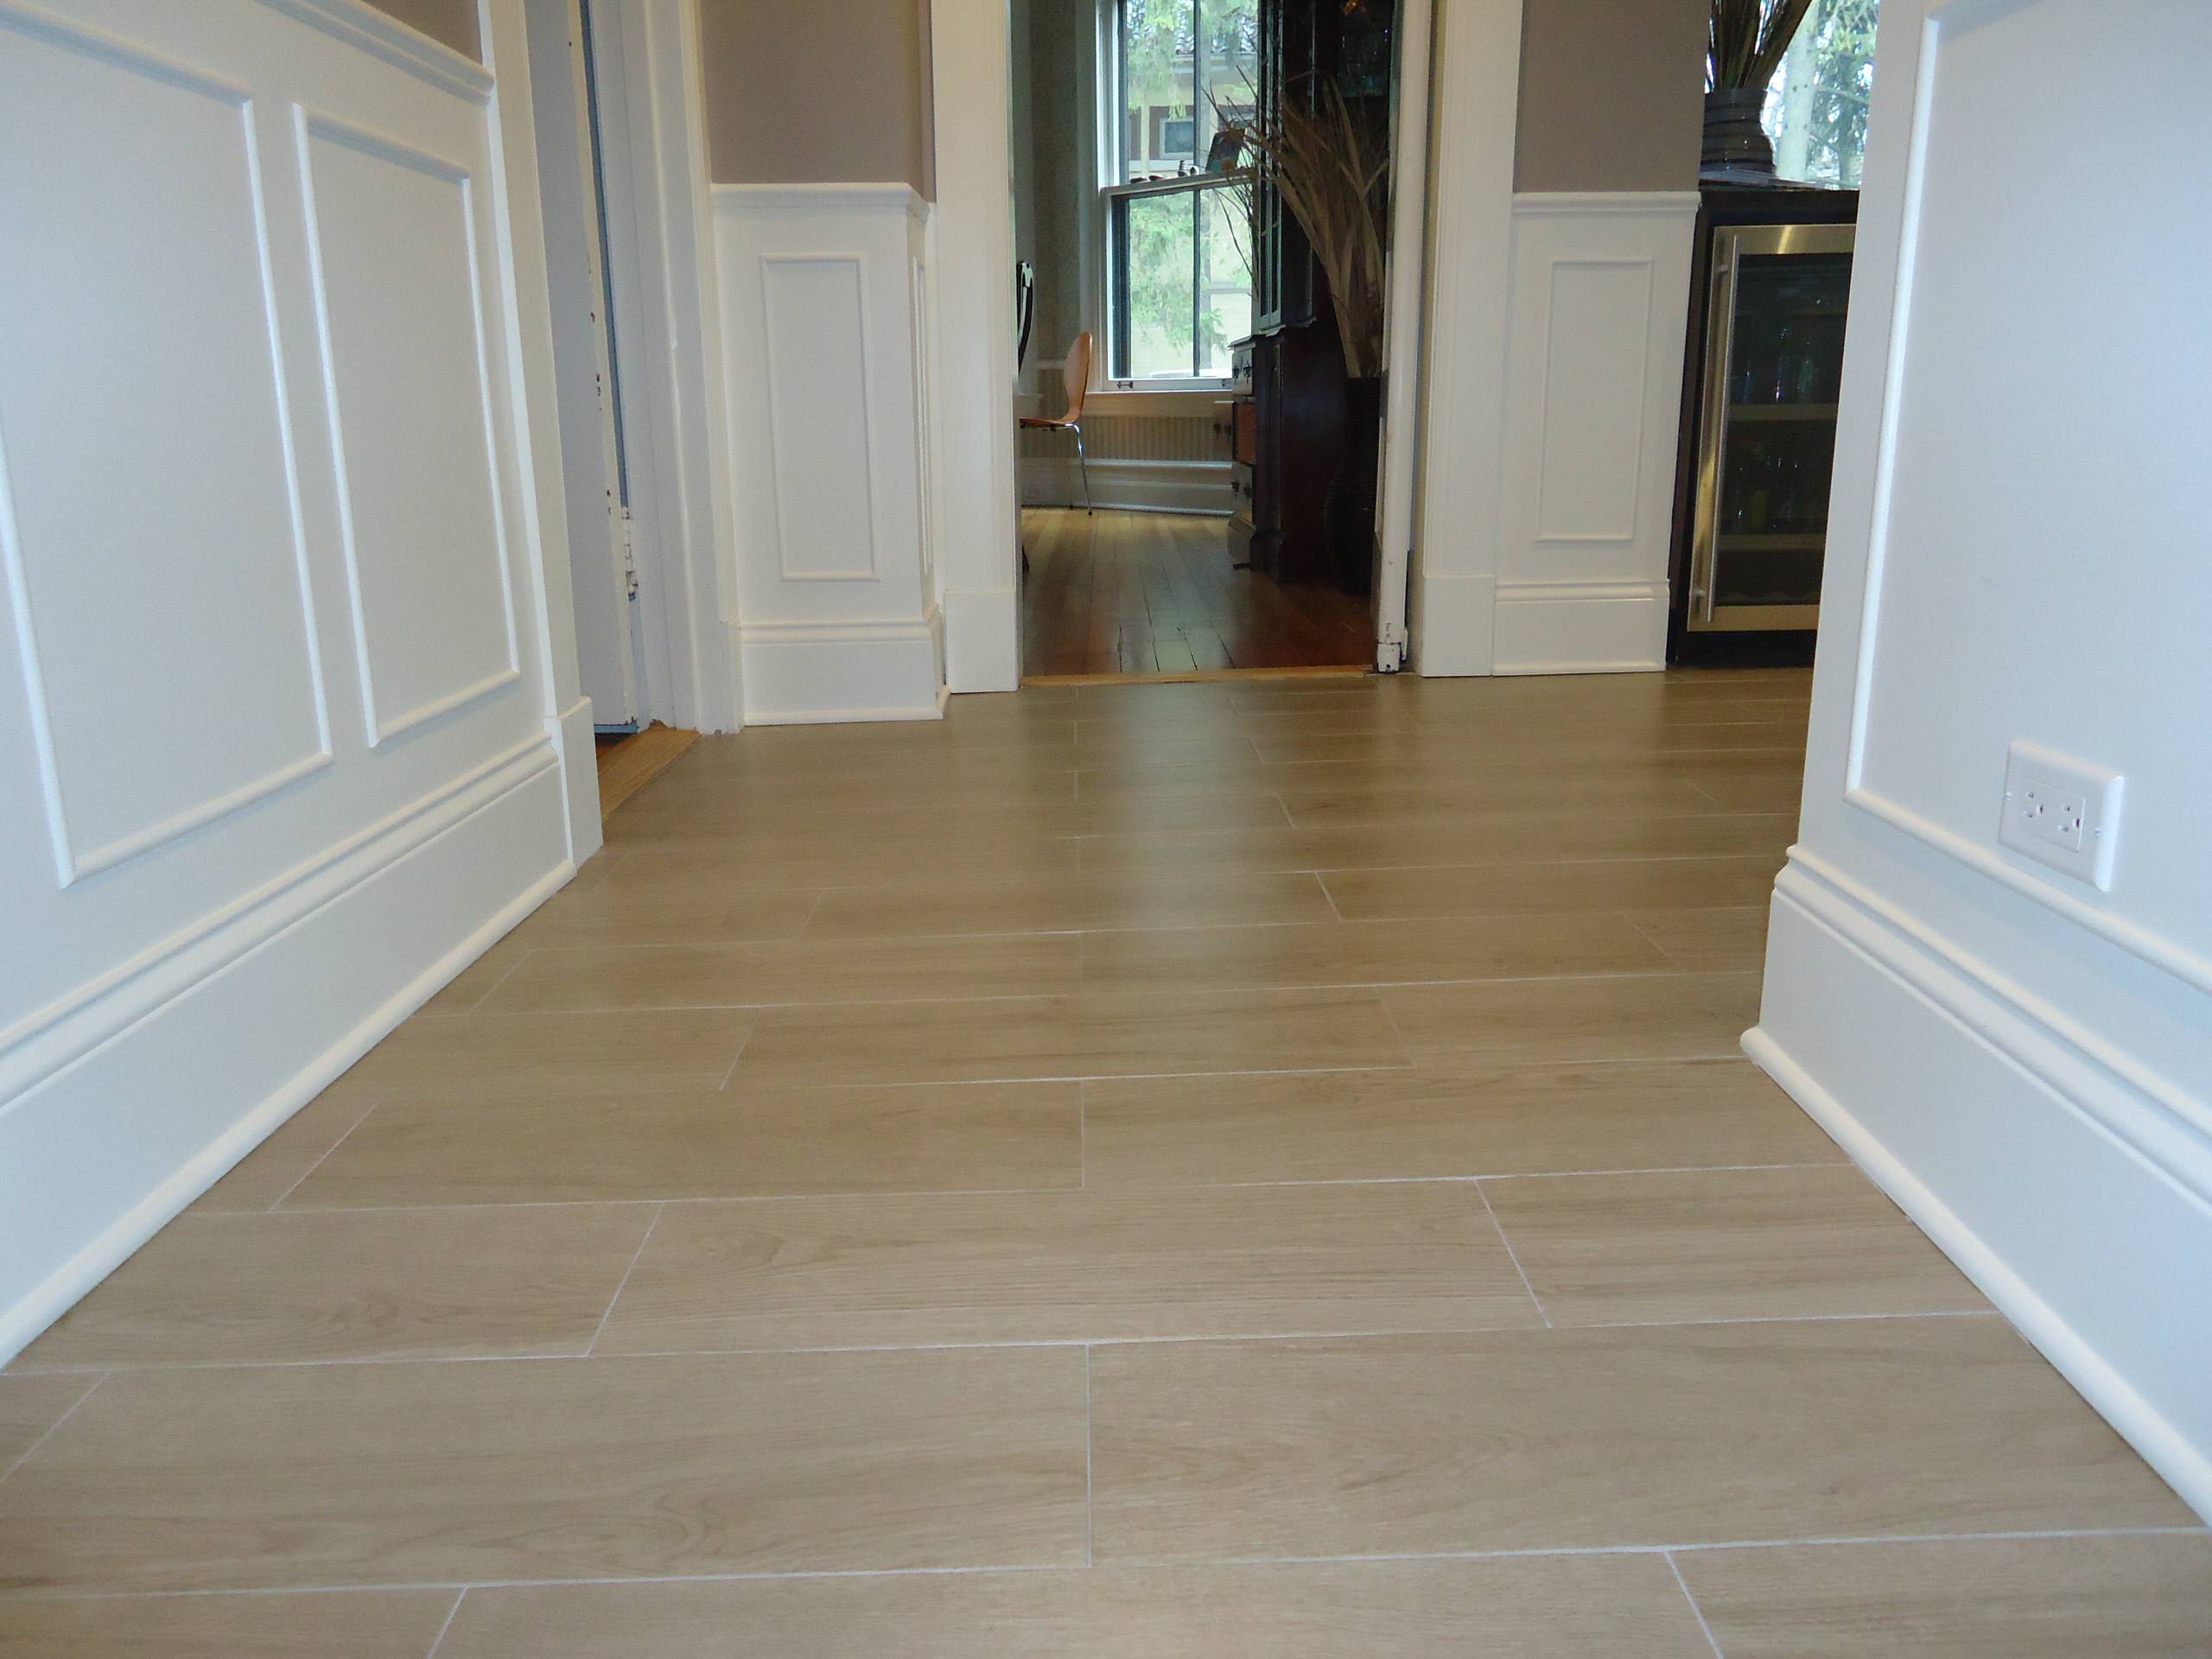 Trim and Tile Installations